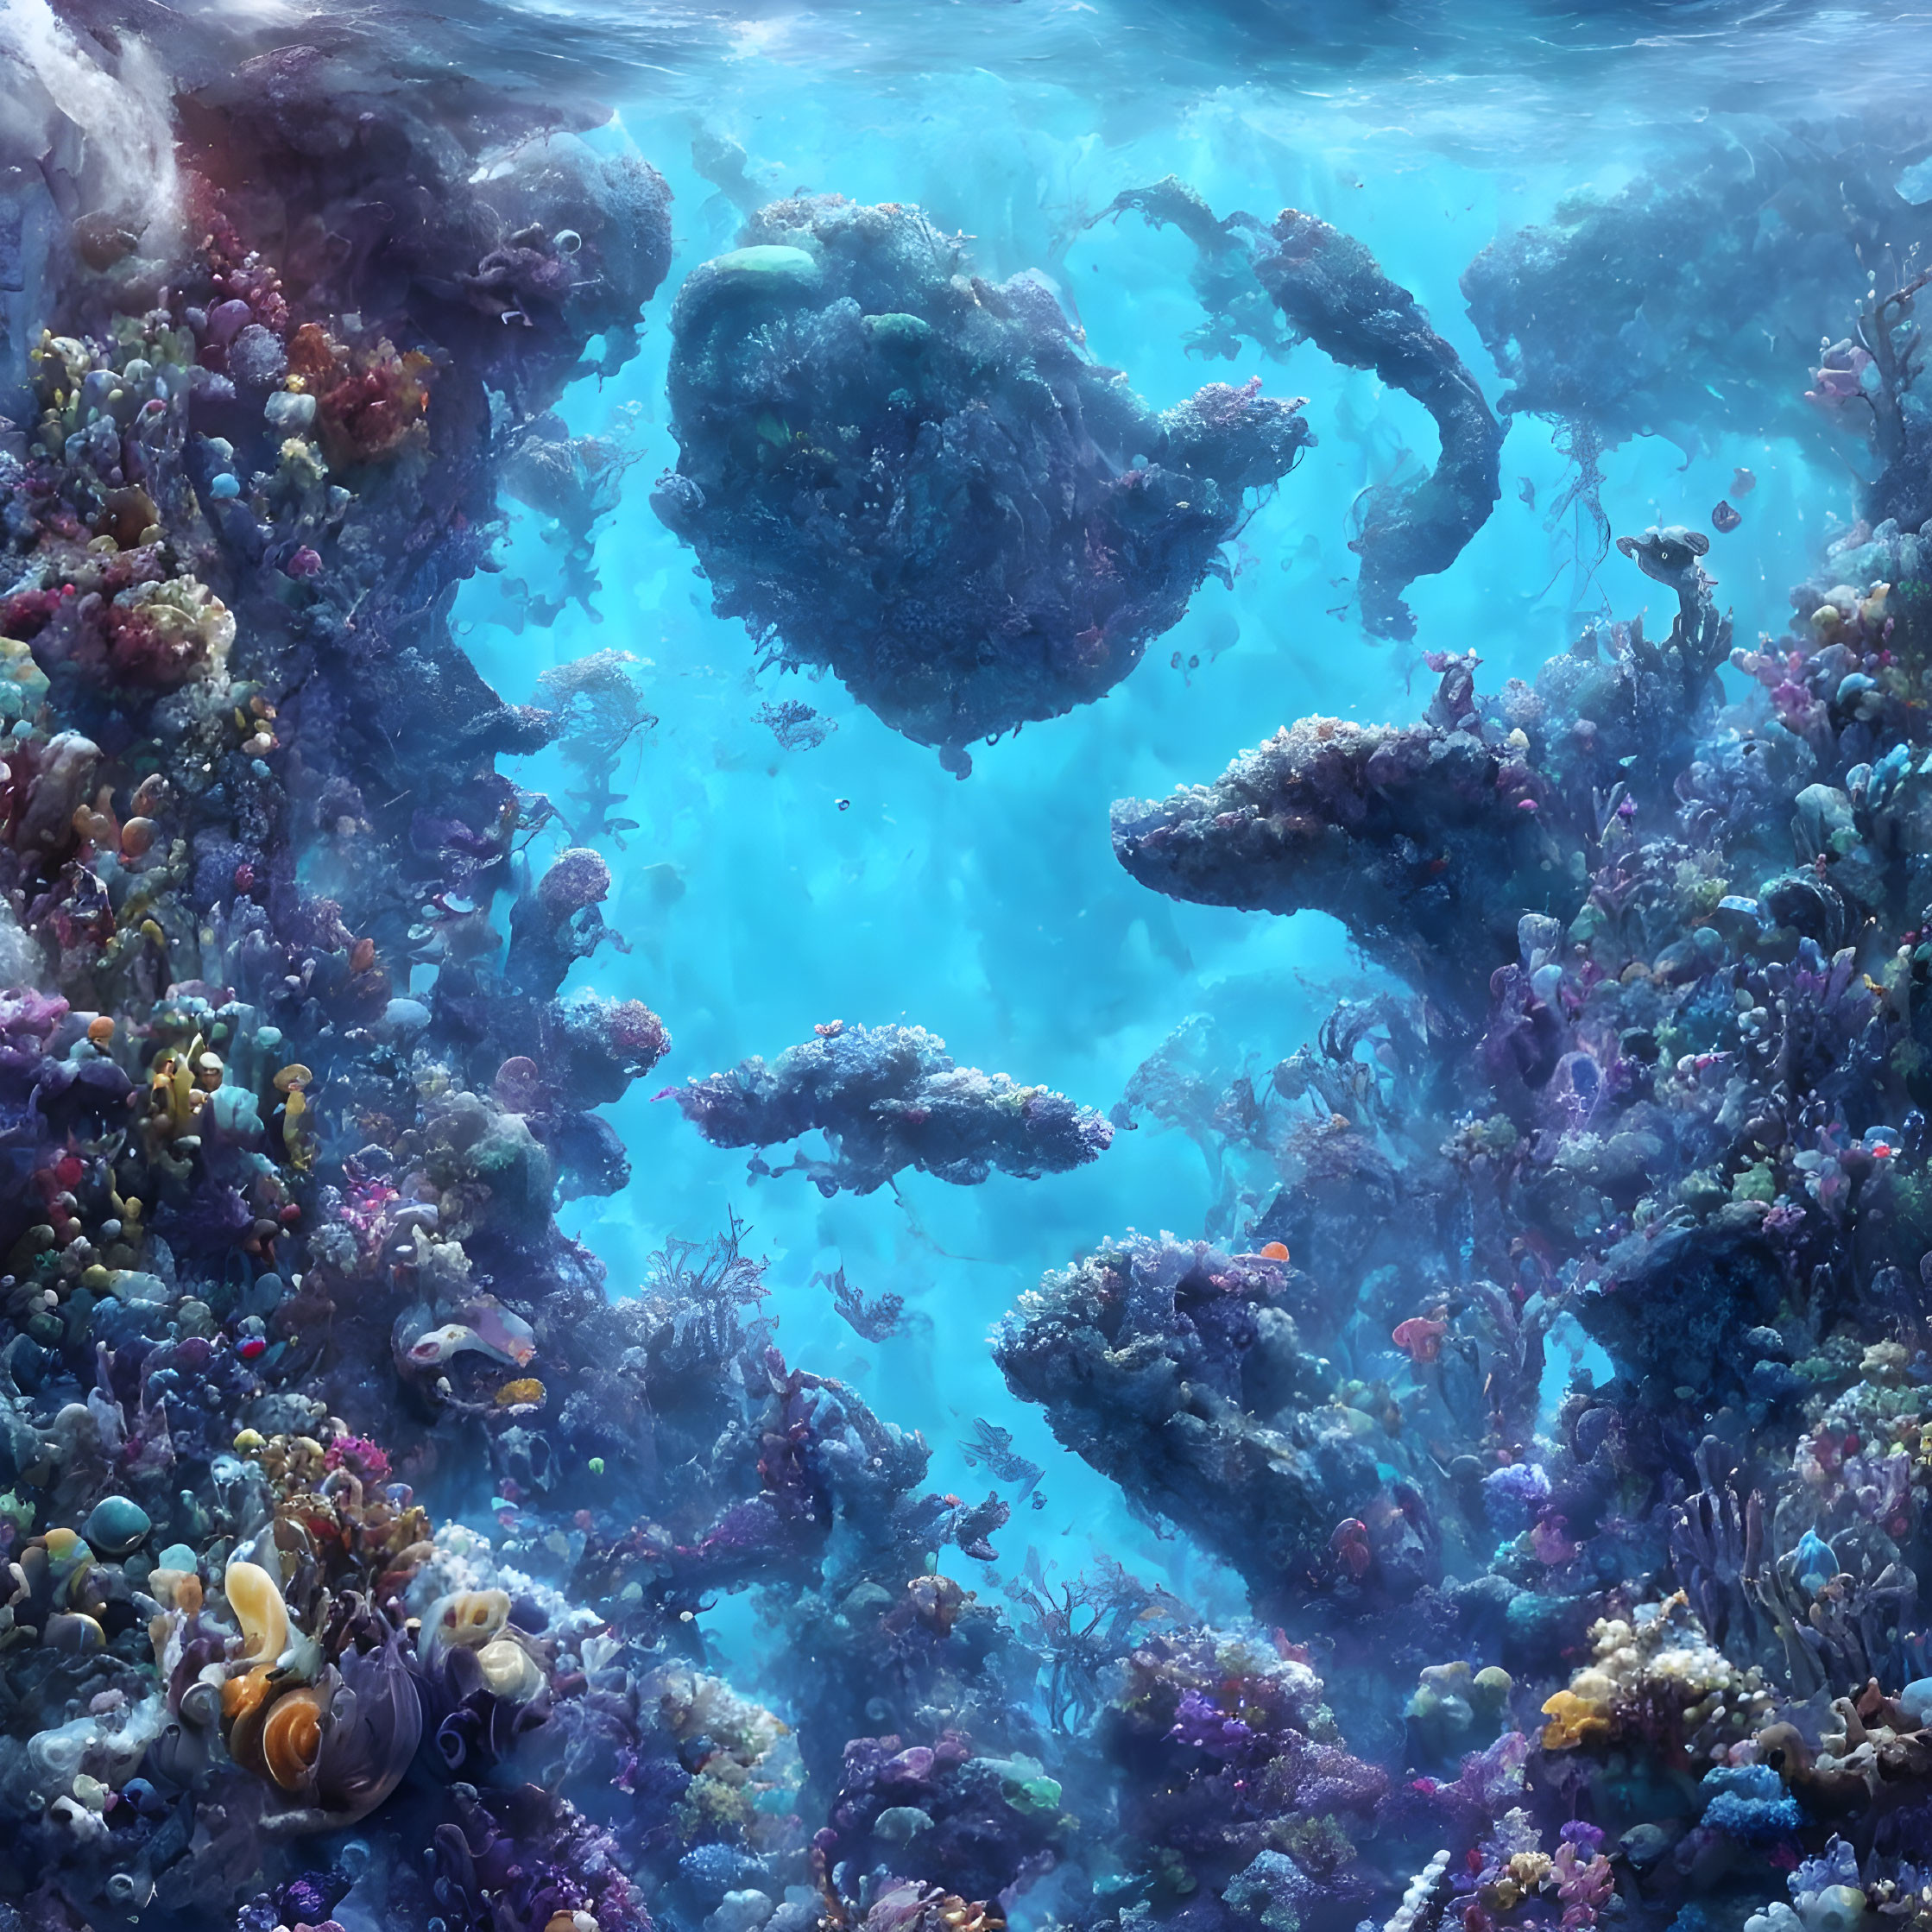 Colorful Coral Formations and Marine Life in Ethereal Underwater Scene